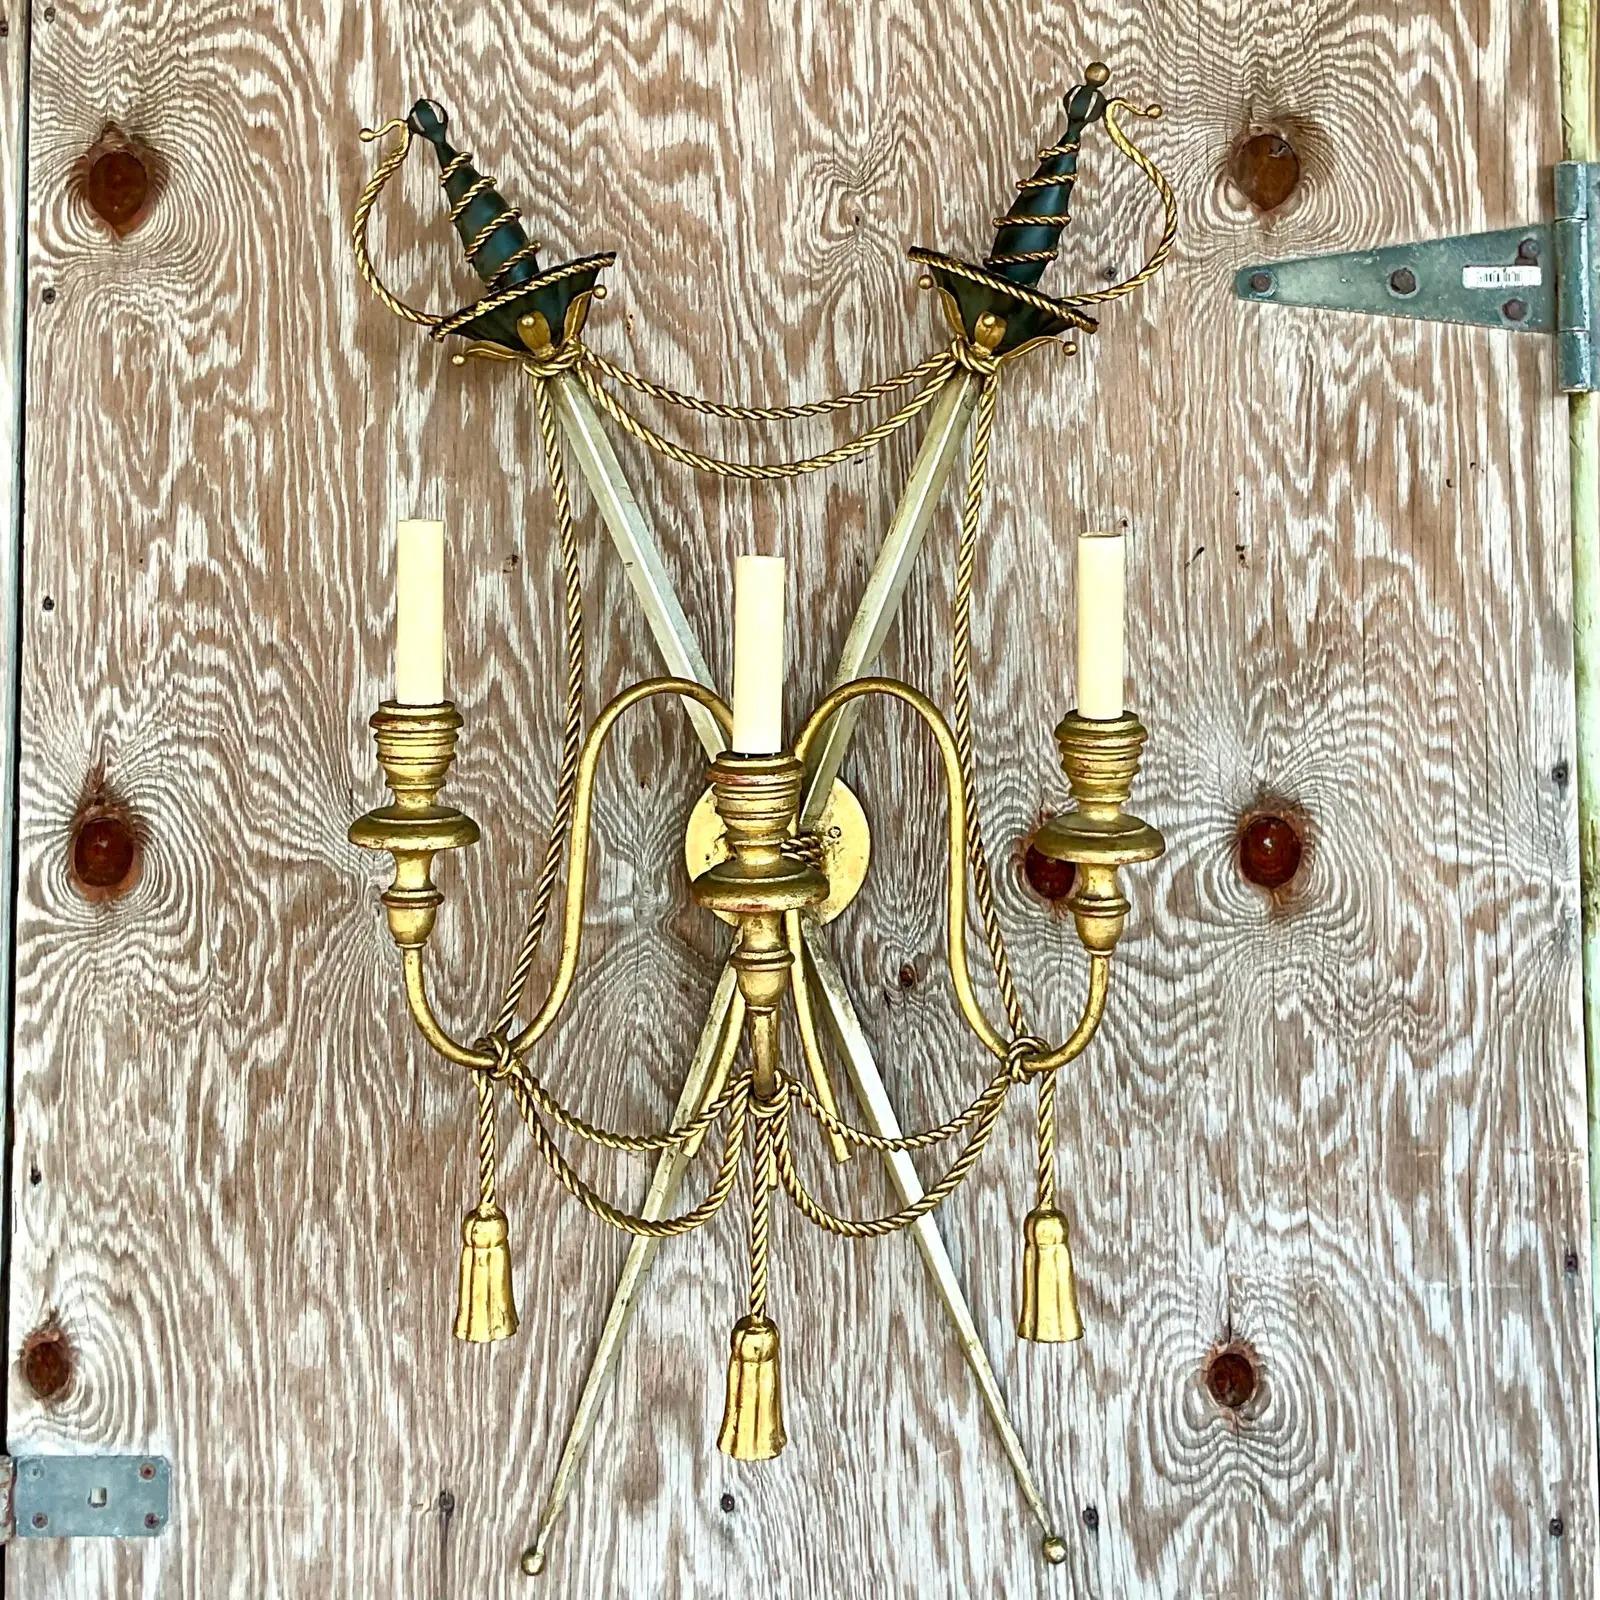 Incredible vintage regency wall sconce. A glamorous swag design with two crossed swords. Acquired from a Palm Beach estate.